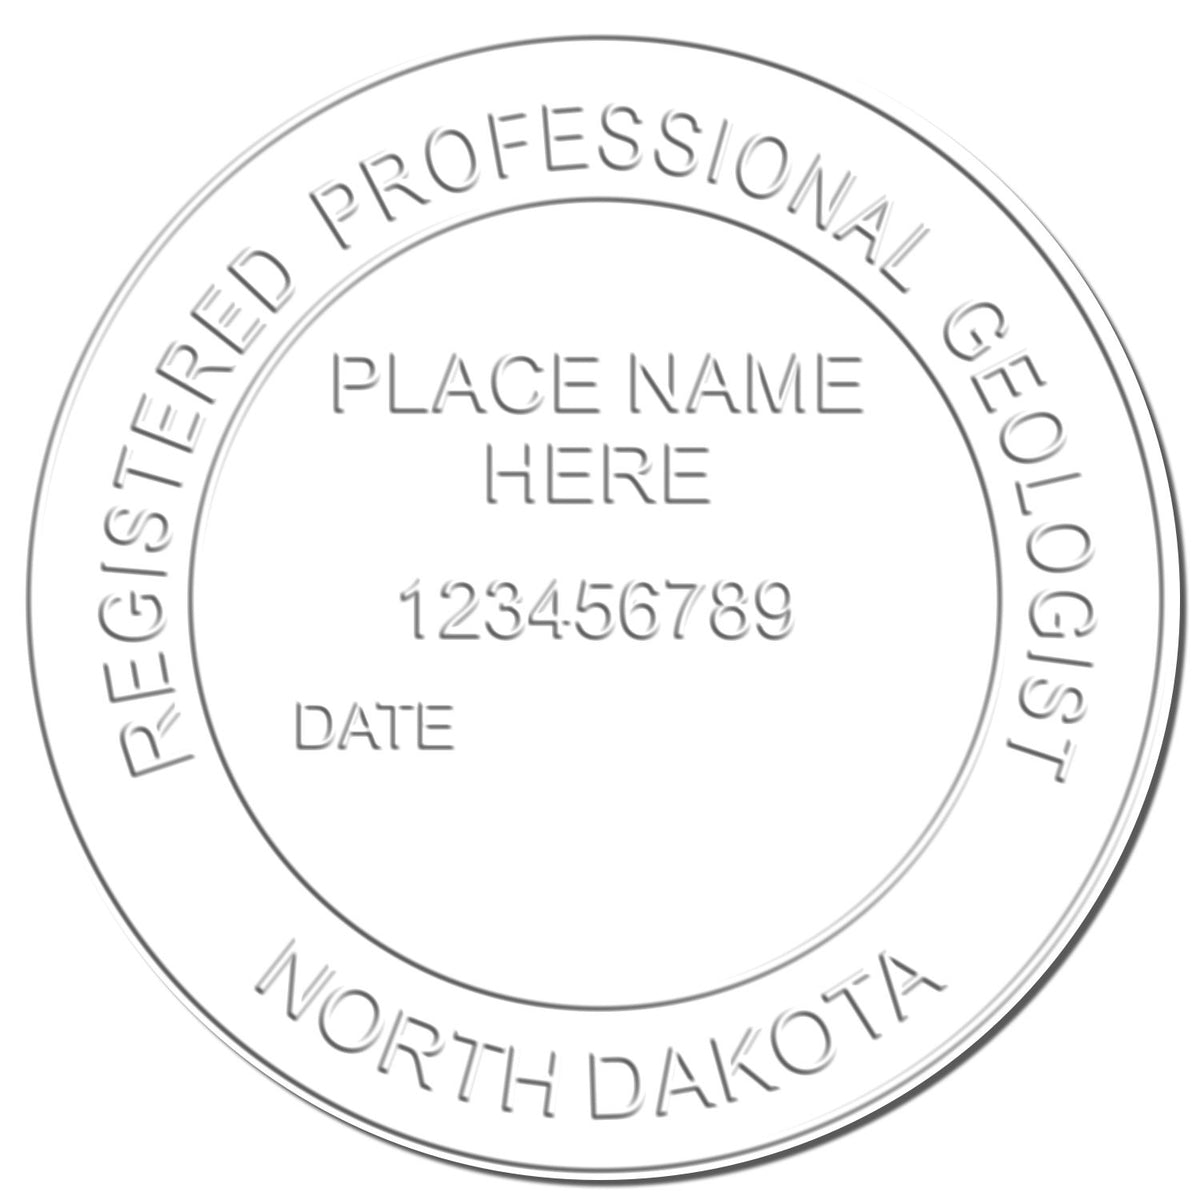 A photograph of the Hybrid North Dakota Geologist Seal stamp impression reveals a vivid, professional image of the on paper.